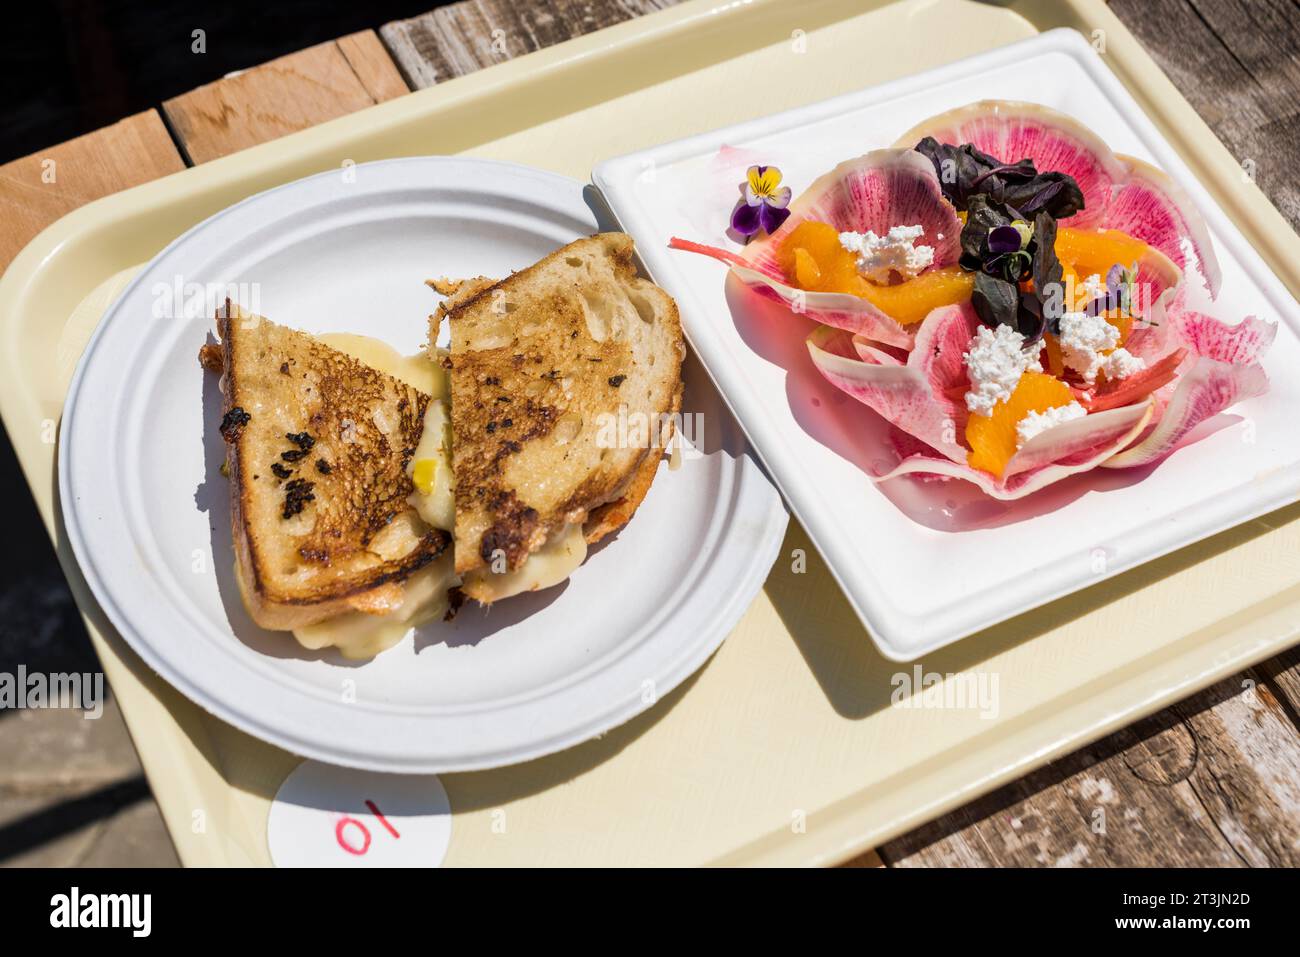 Take away tray with grilled cheese sandwich and watermelon radish salad Stock Photo